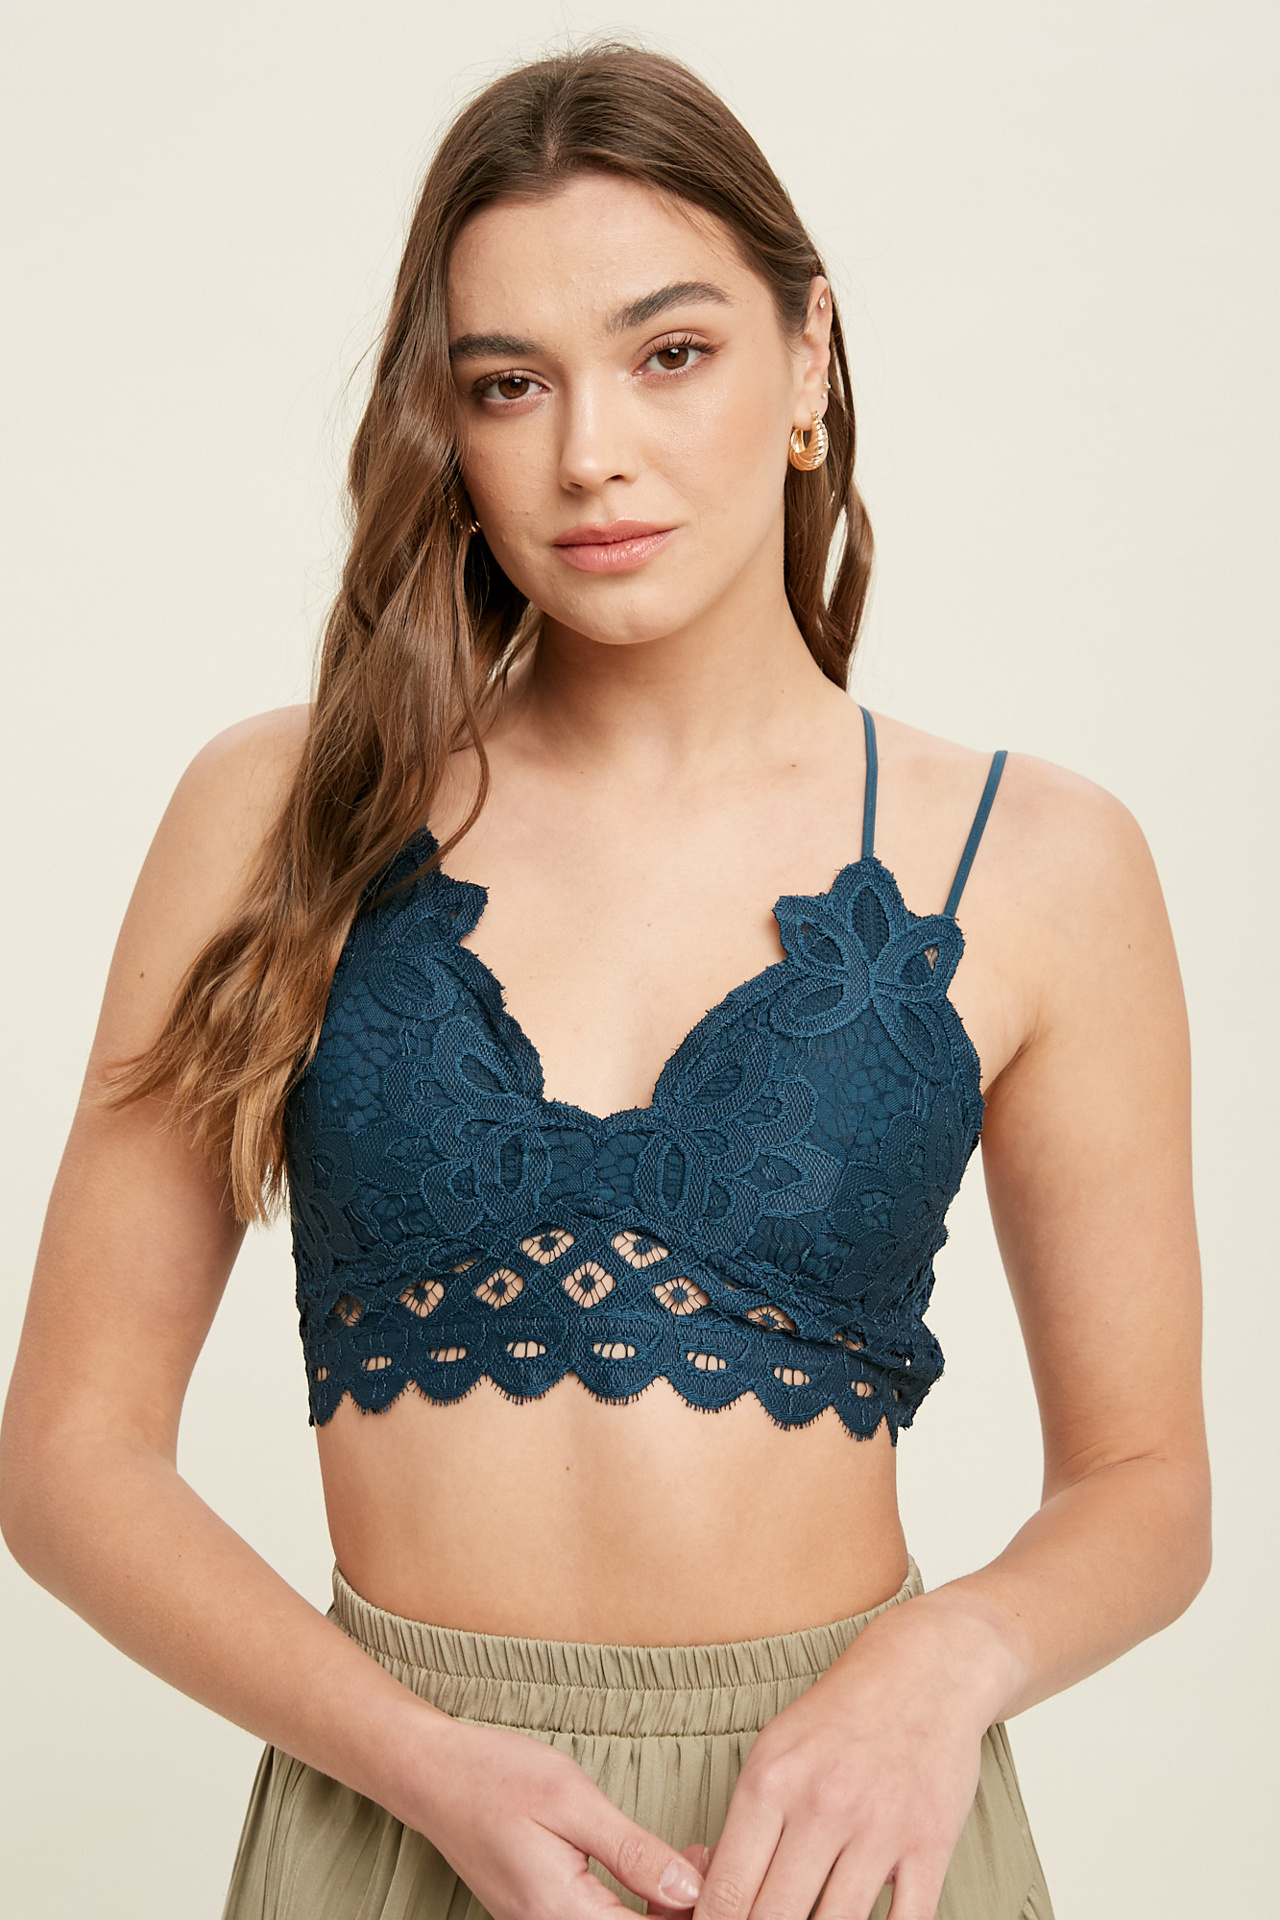 Lacy Bralette Poster